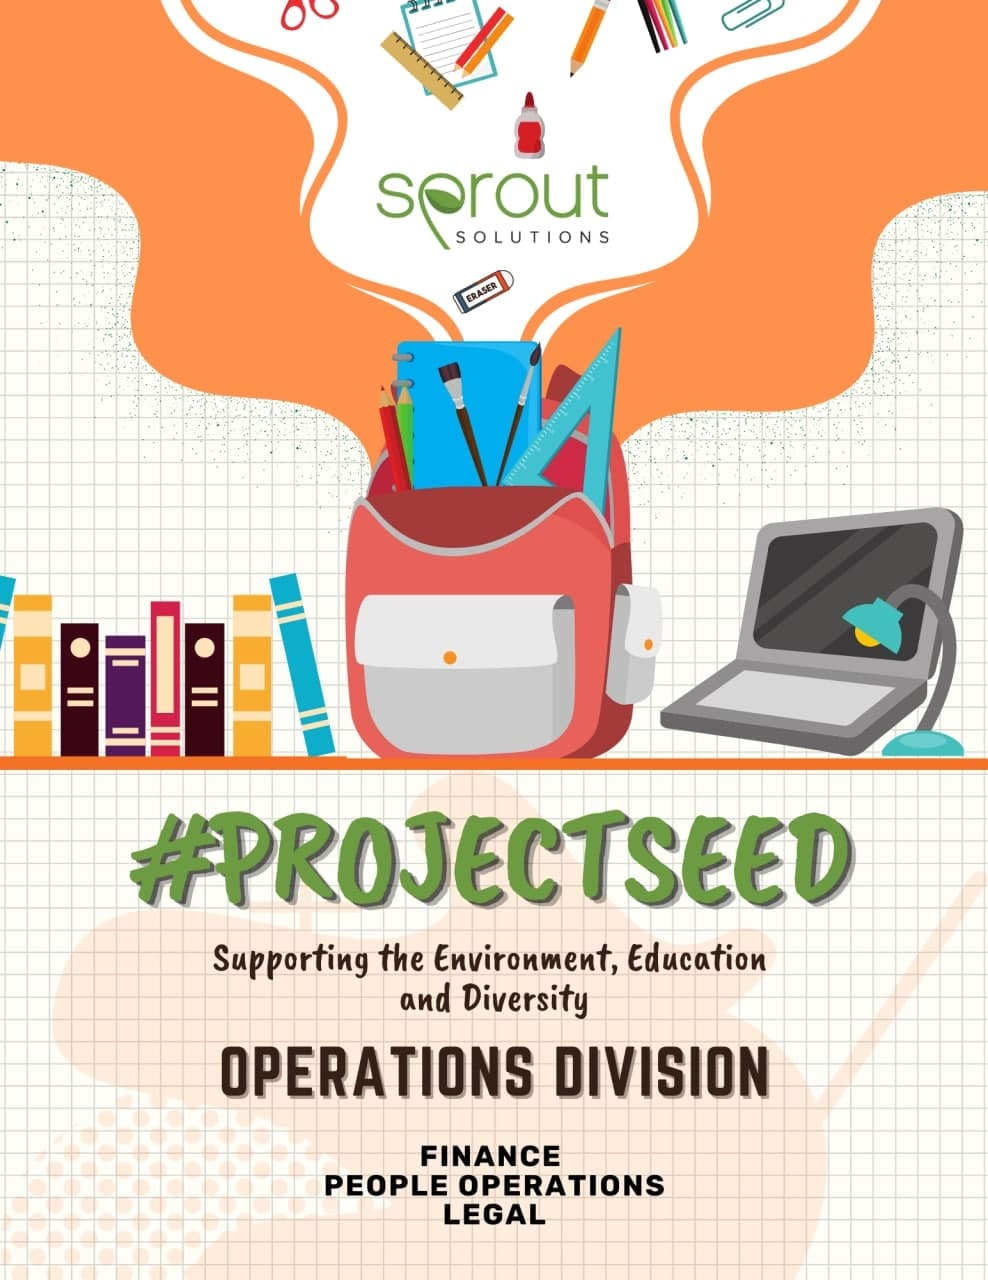 Project Seed: Sprout's Corporate Social Responsibility